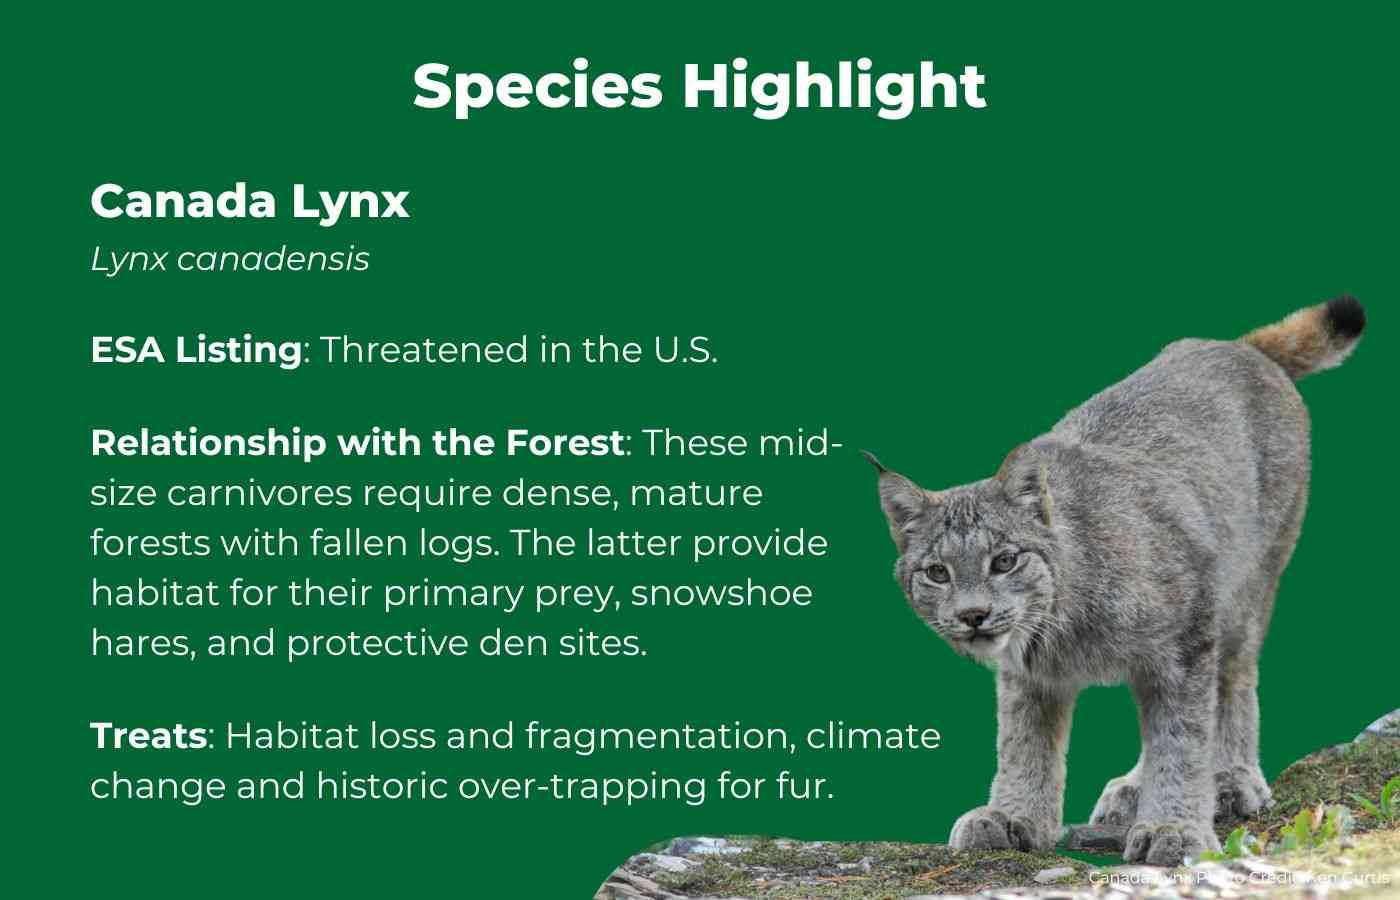 Canada Lynx Facts Graphic